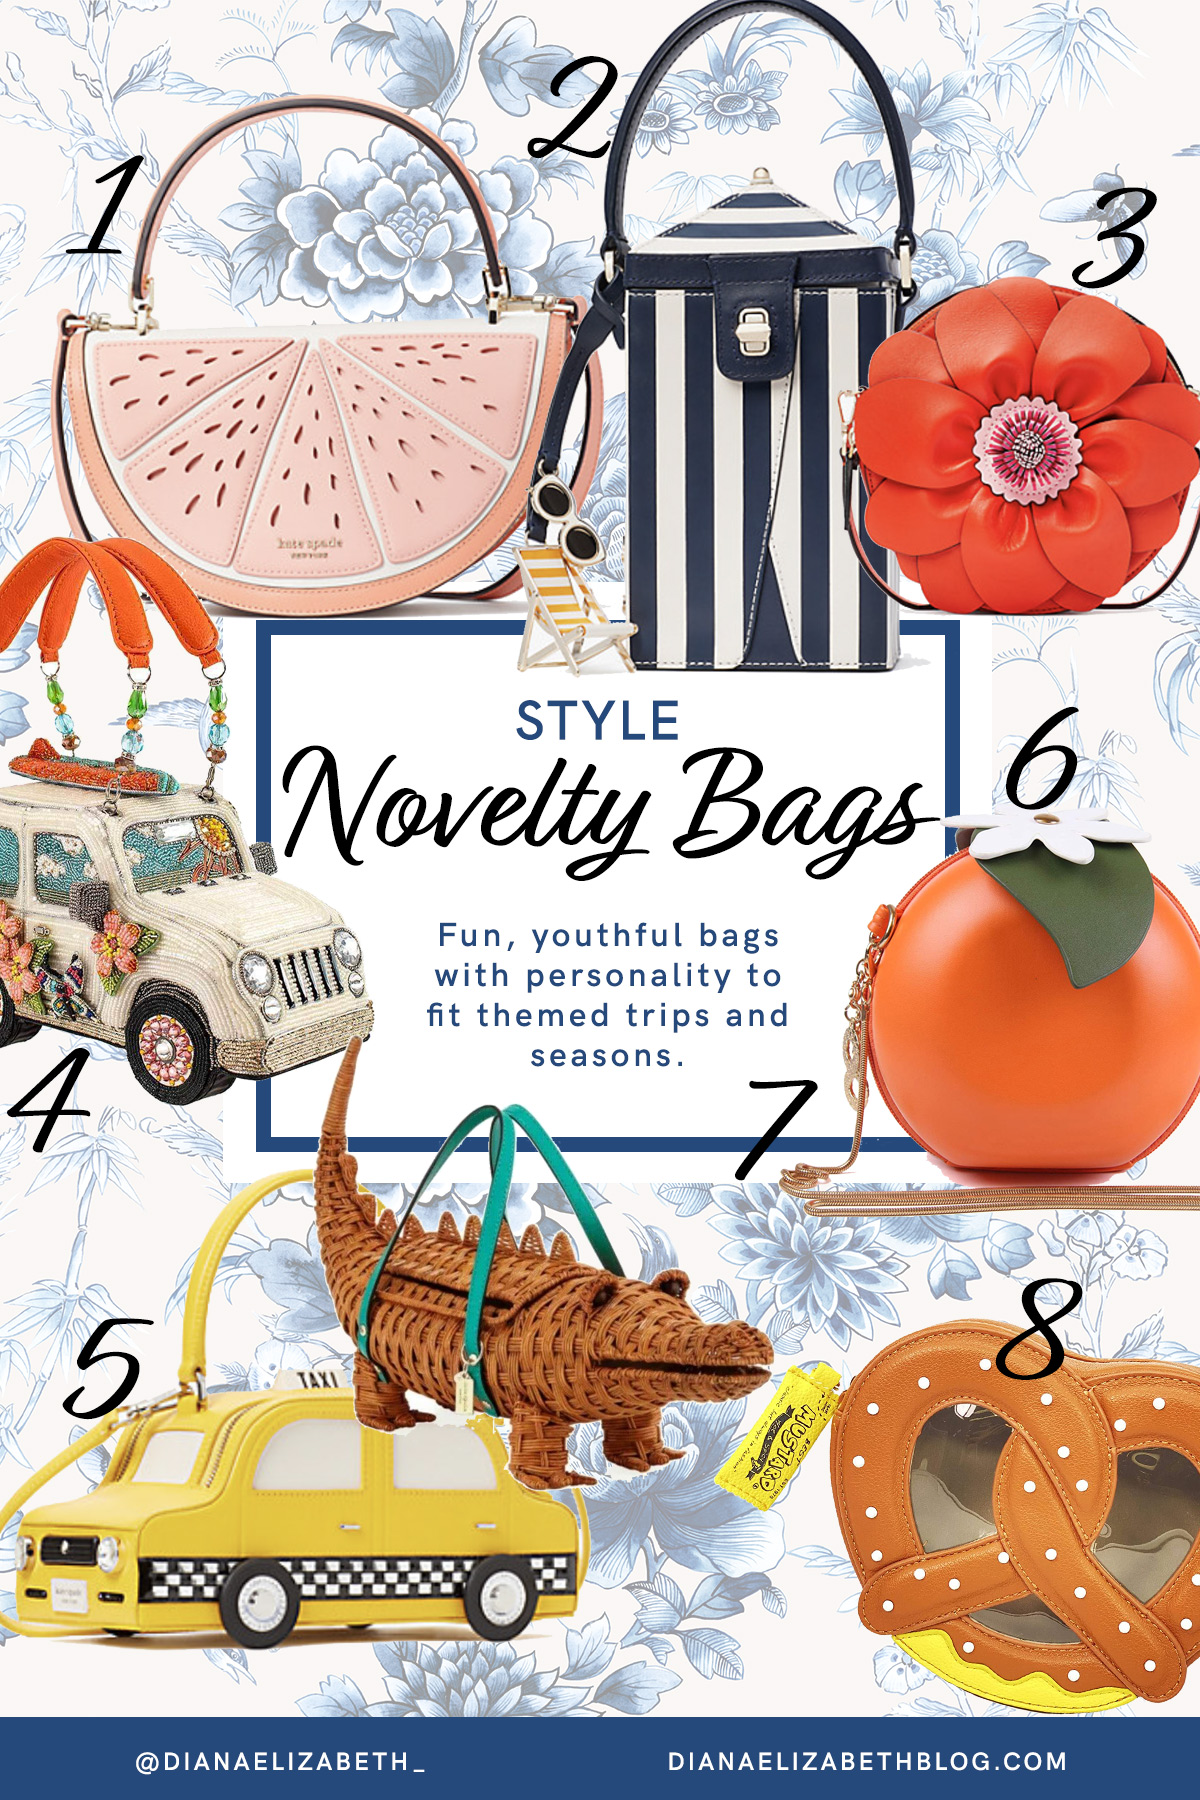 30 Novelty Bags - Add them to your closet! - Diana Elizabeth